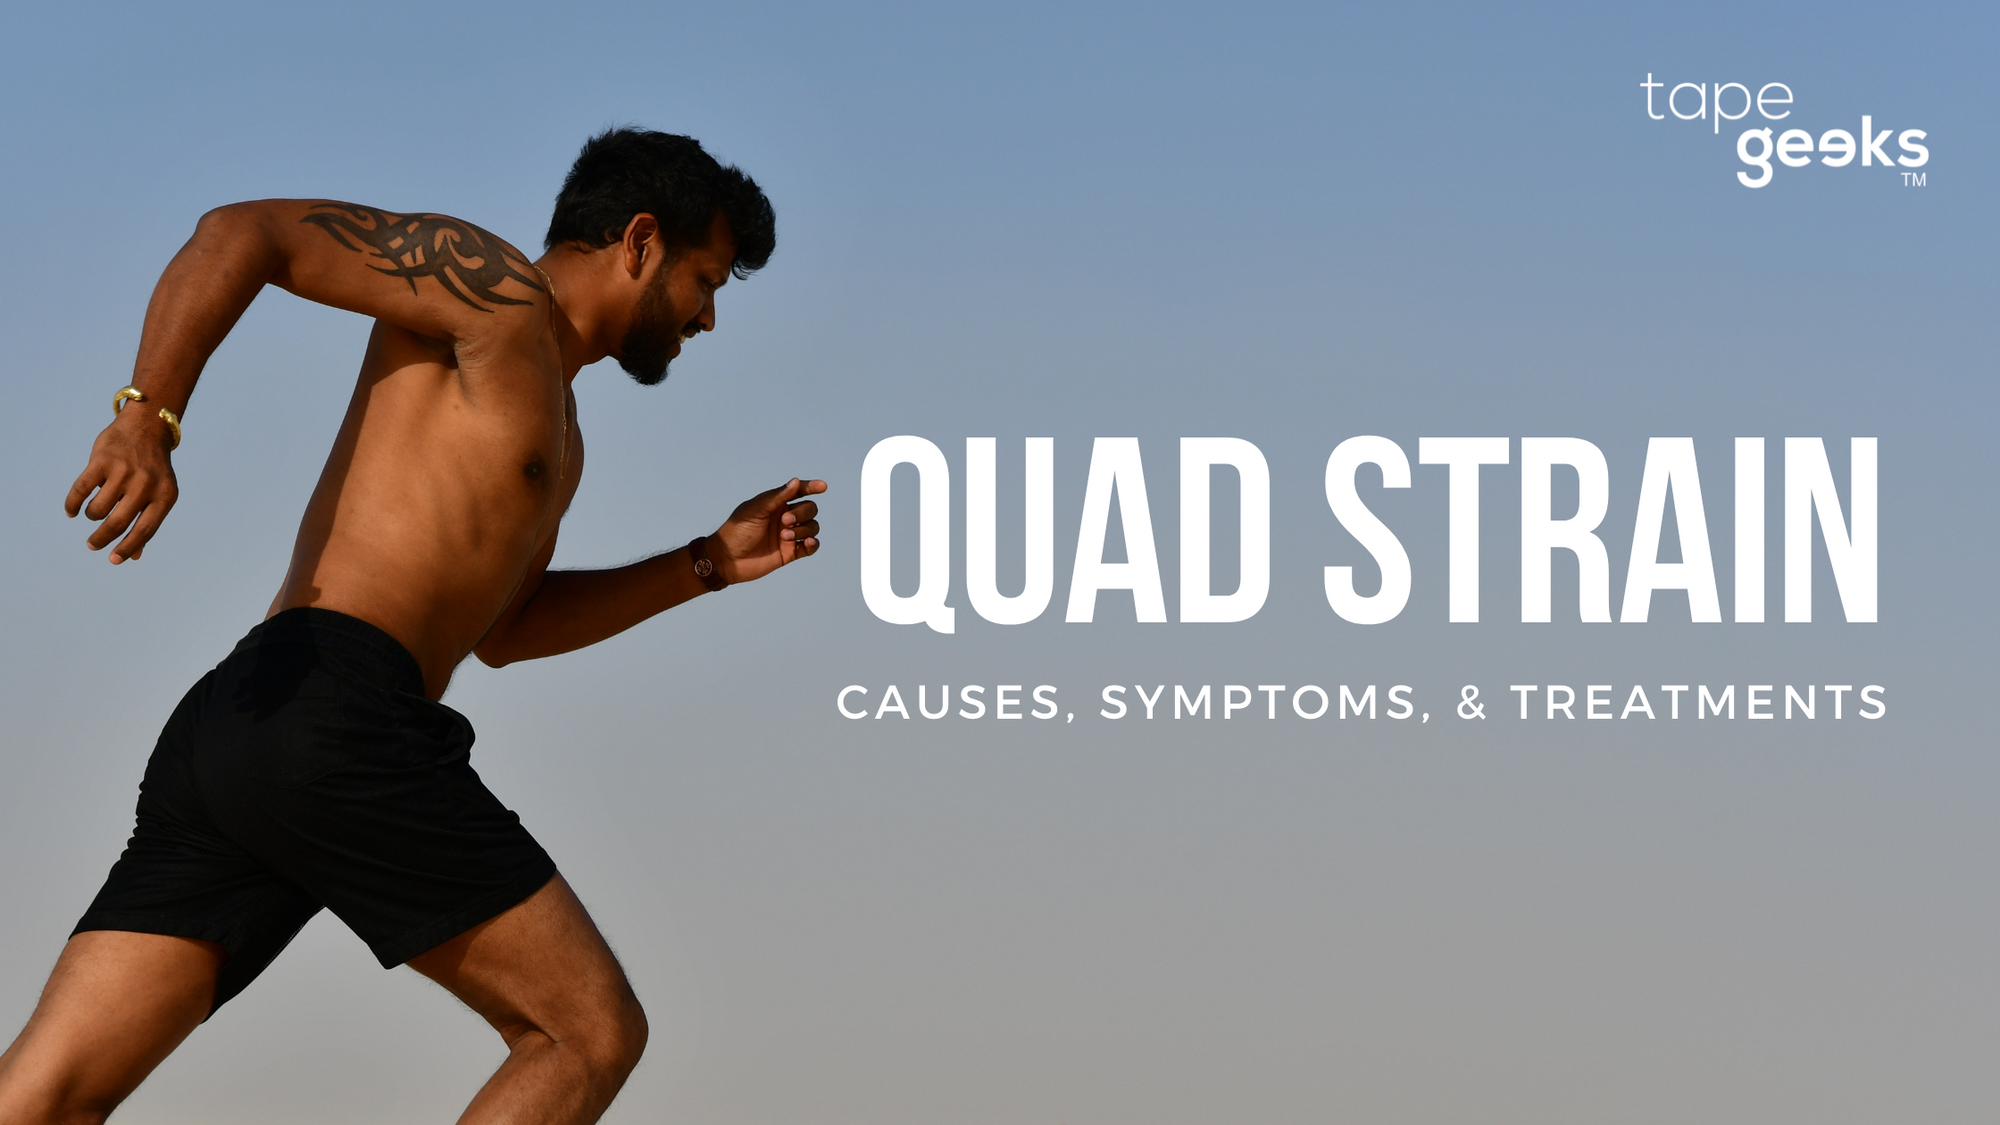 QUAD STRAIN: KINESIOLOGY TAPING AND TREATMENT